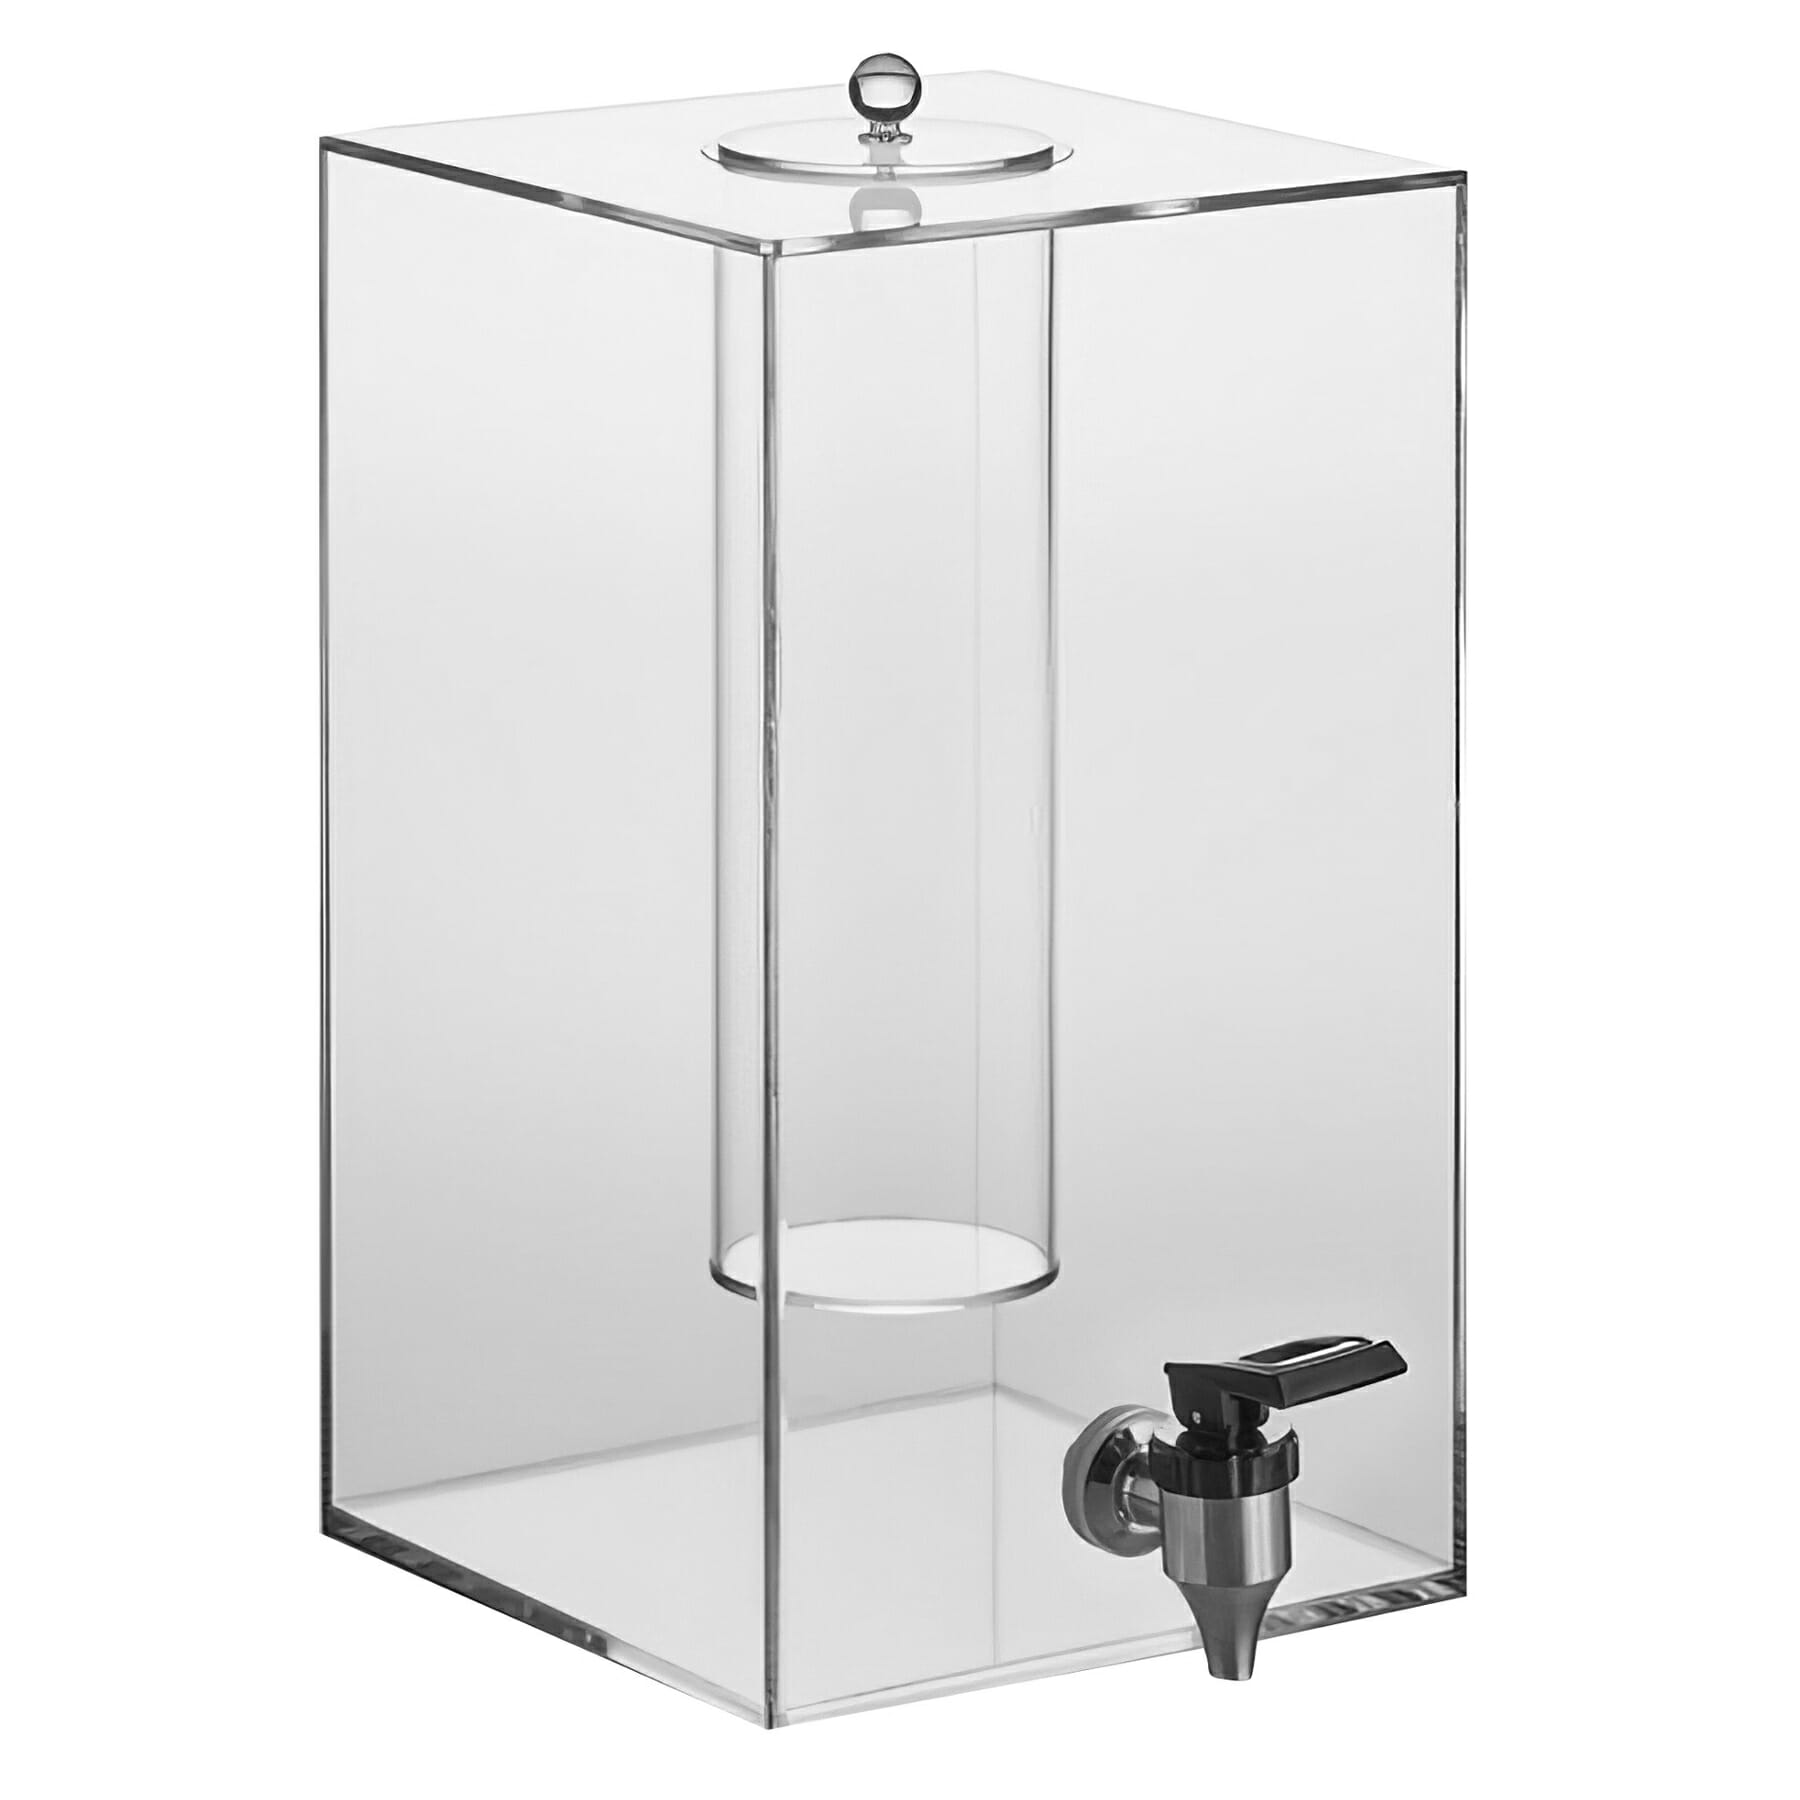 3 gal., 8" Square Acrylic Juice / Beverage Dispenser with Ice Chamber, 14.5" tall (fits WB-955, WB-959)